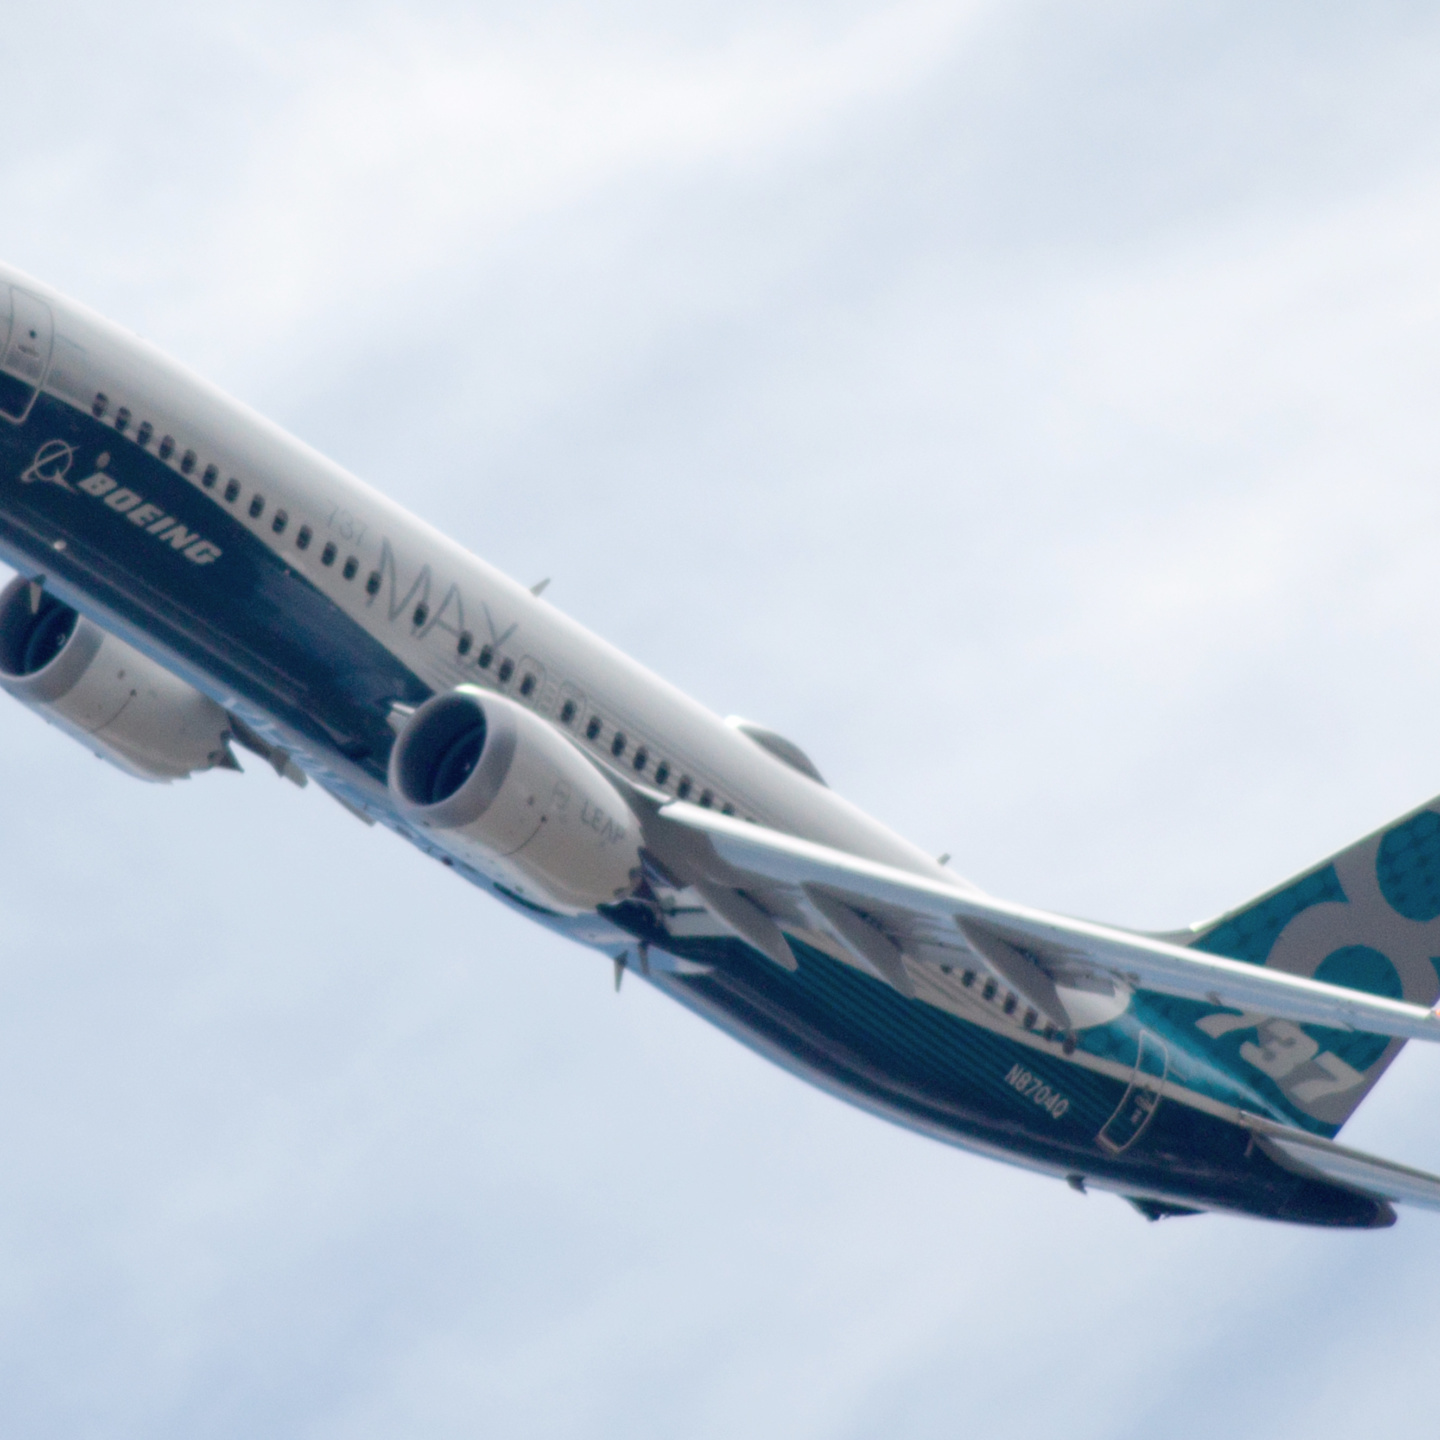 About Time: Trump Announces US Ban of Boeing 737 Max